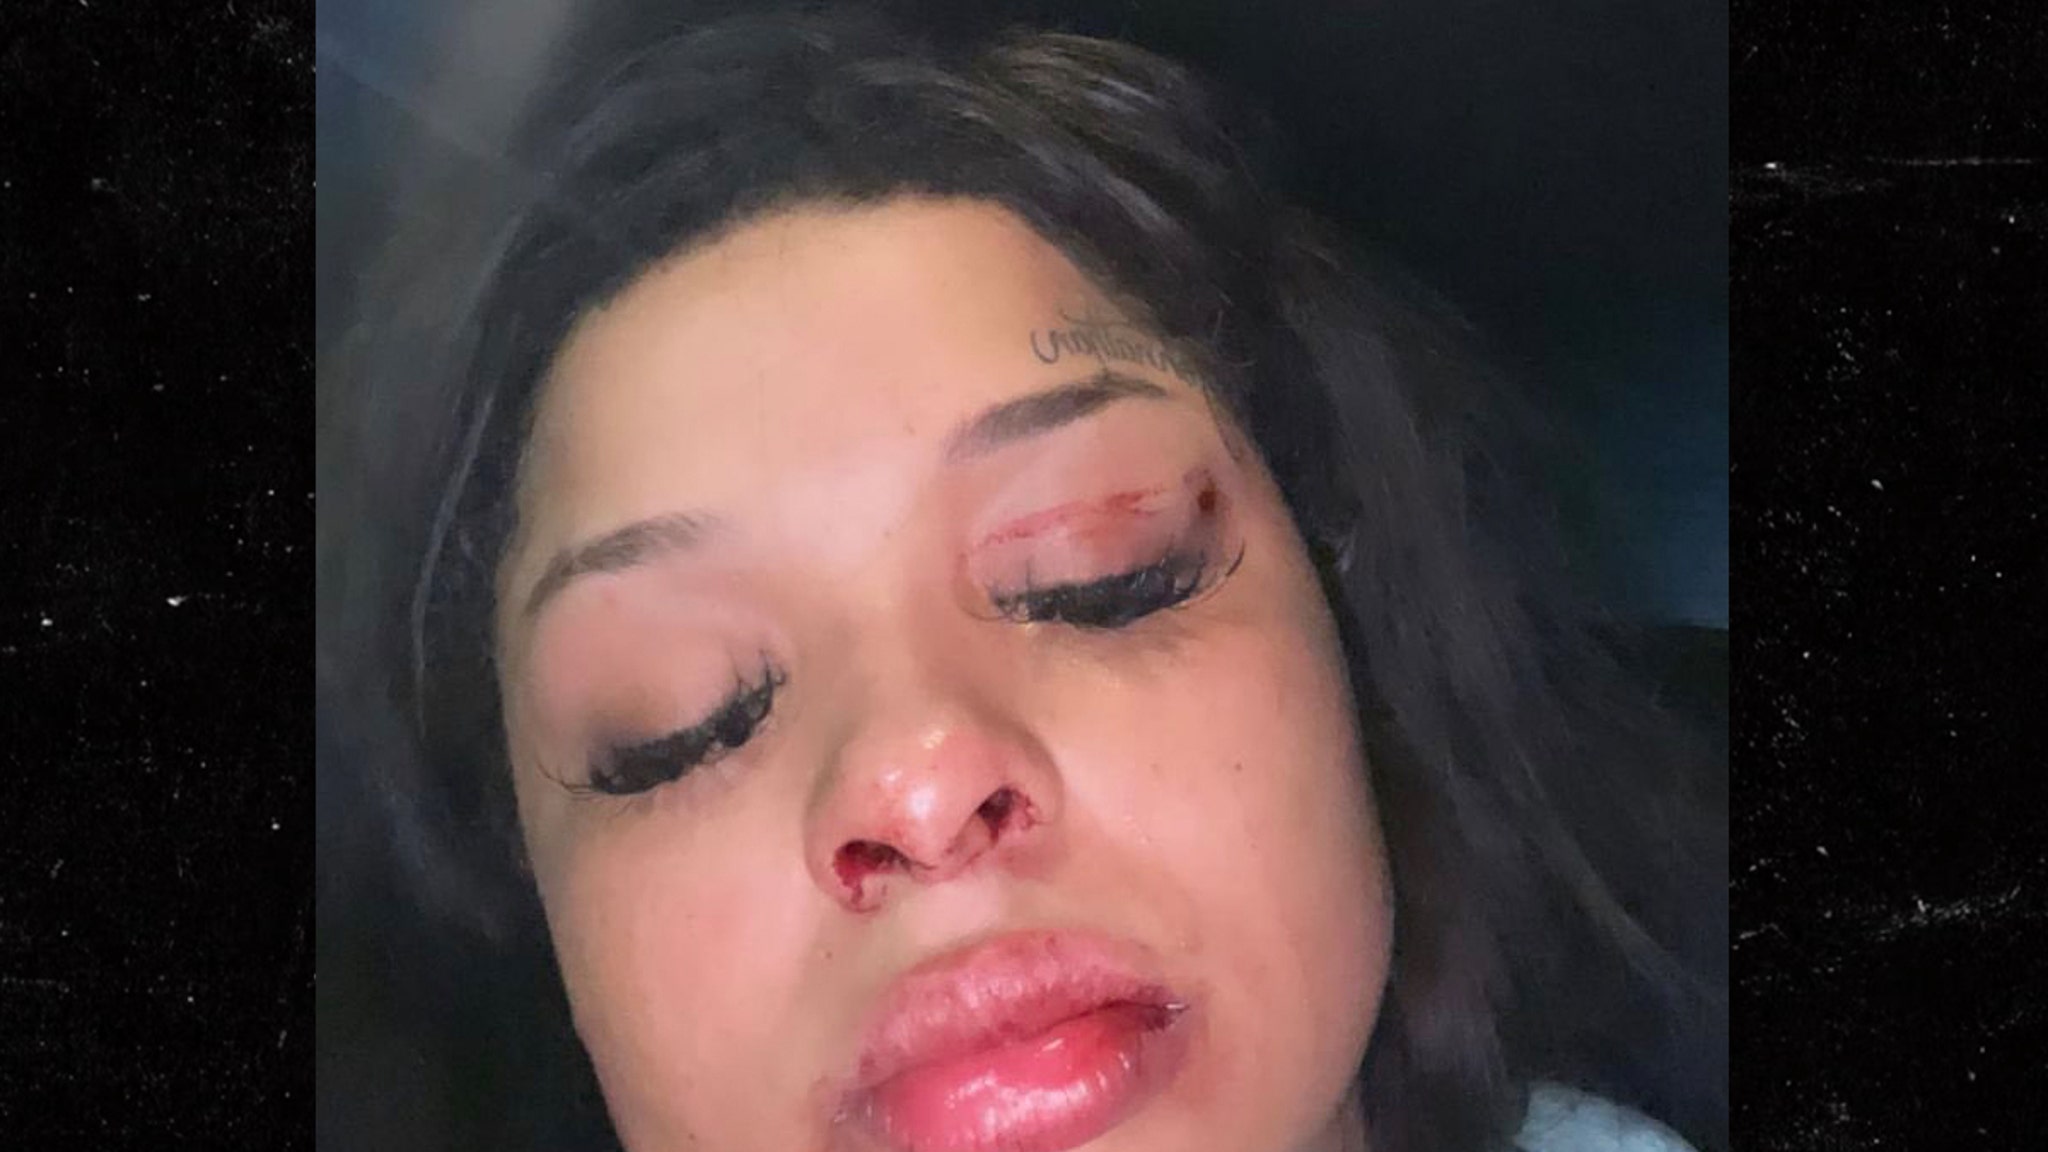 Blueface's GF, Chrisean Rock, Appears to Accuse Him of Domestic Violence